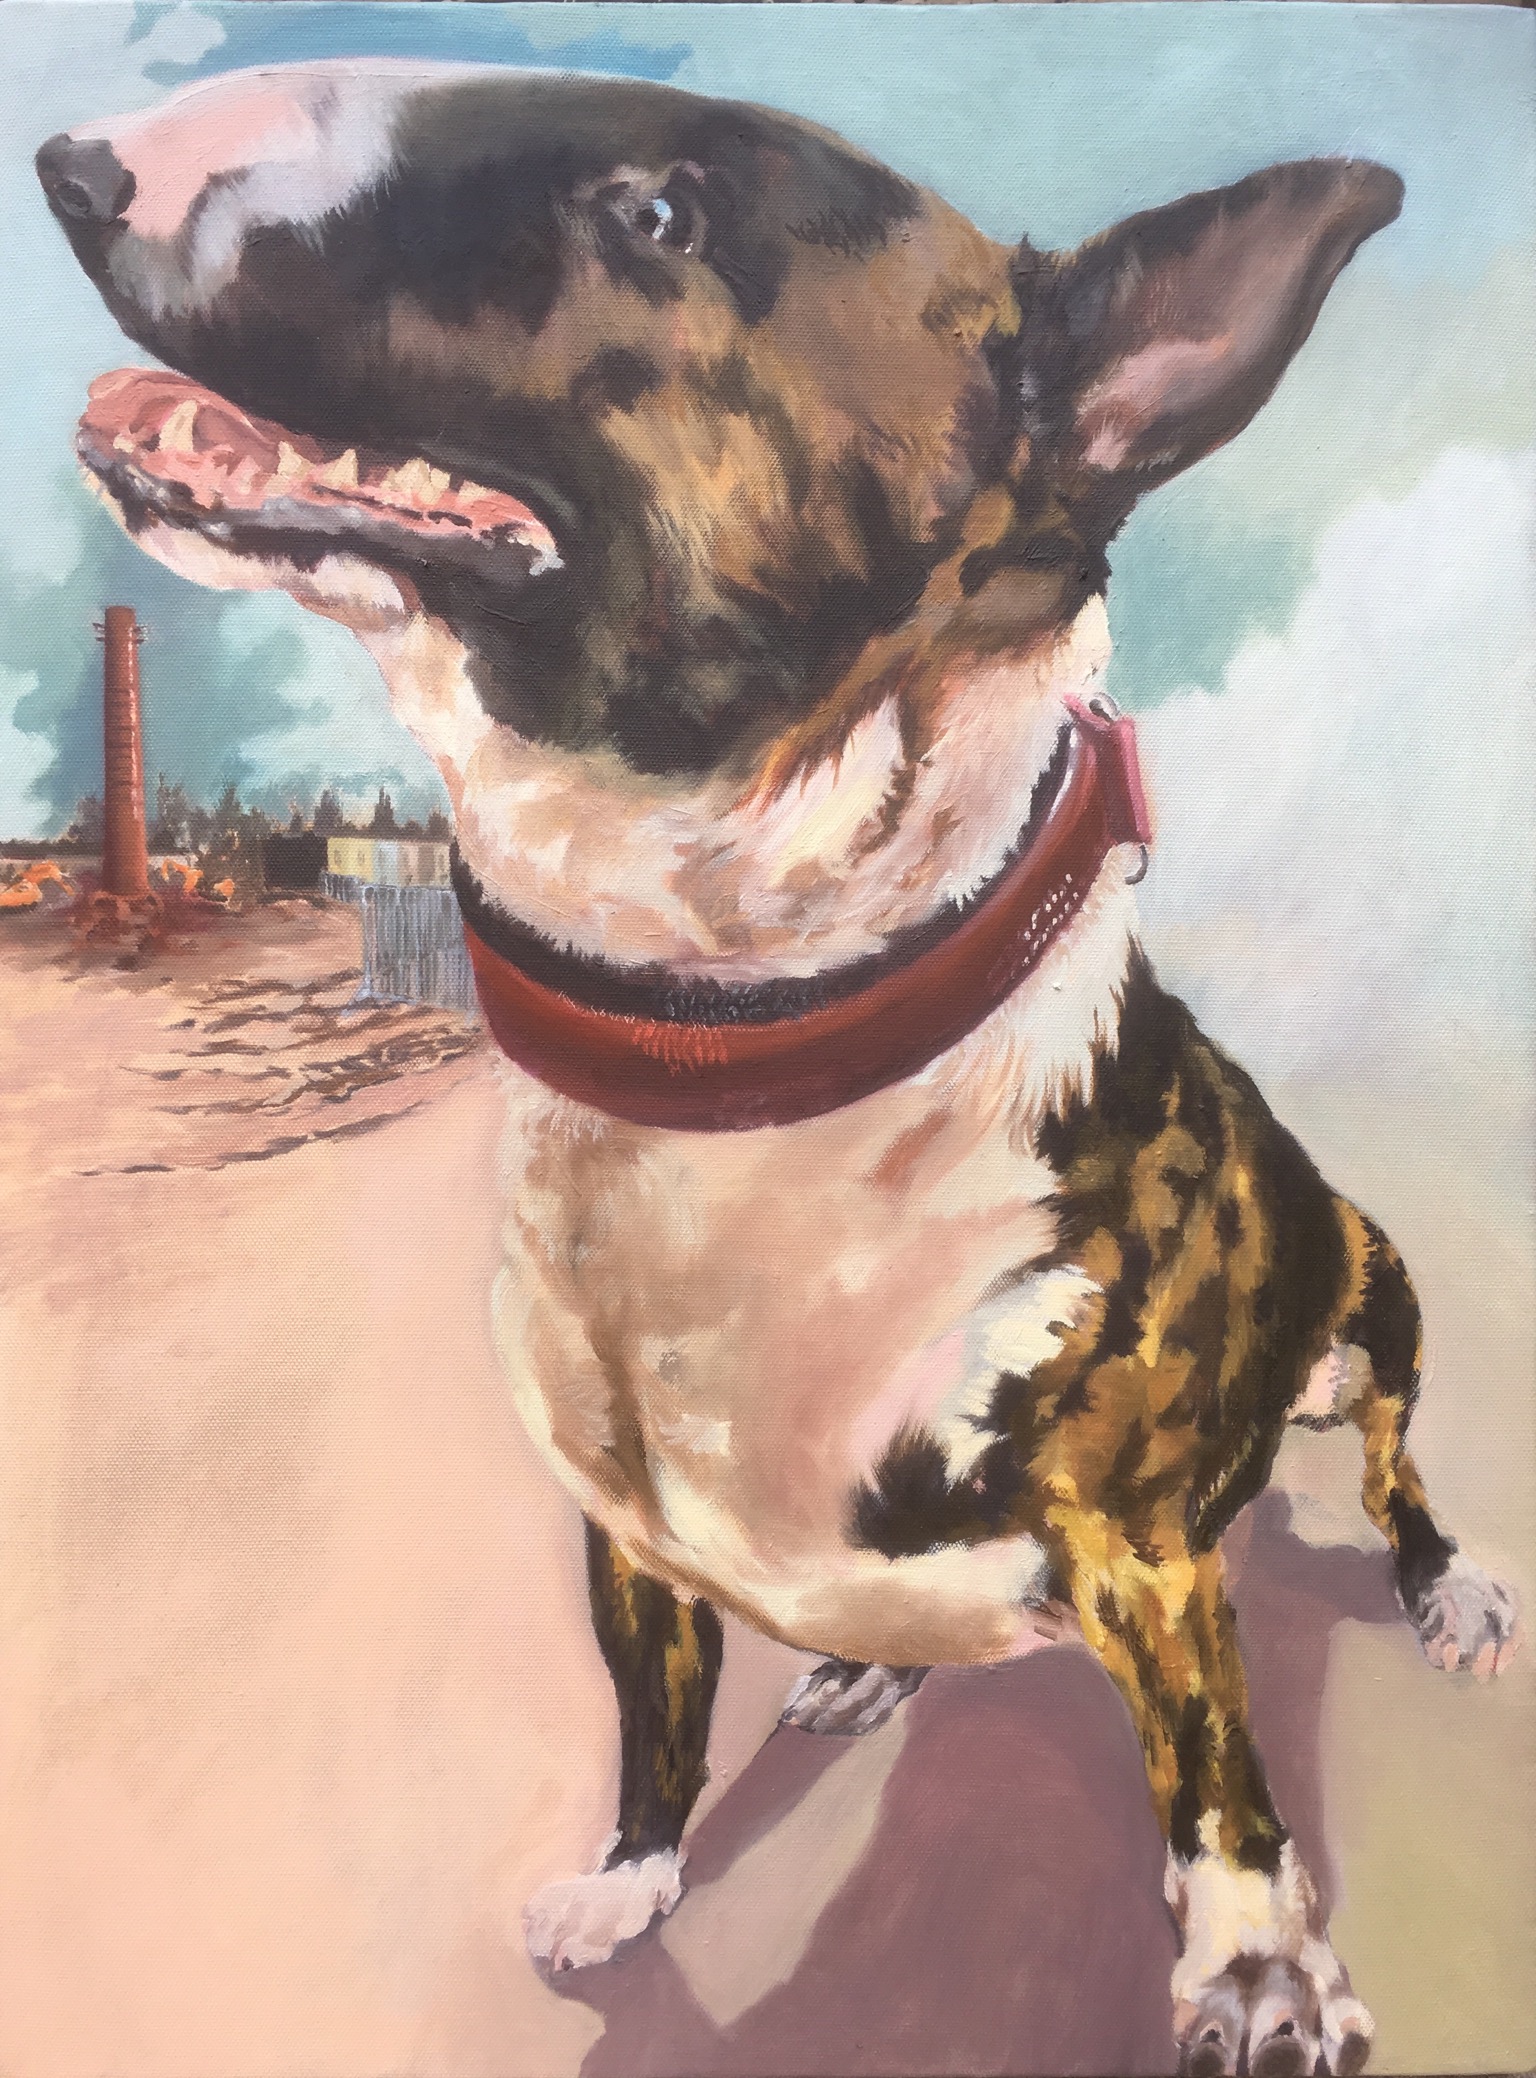 'Butler The English Bull Terrier Before Brooks Dyeworks', Sheena Vallely, Oil on canvas, 70 x 50 cm